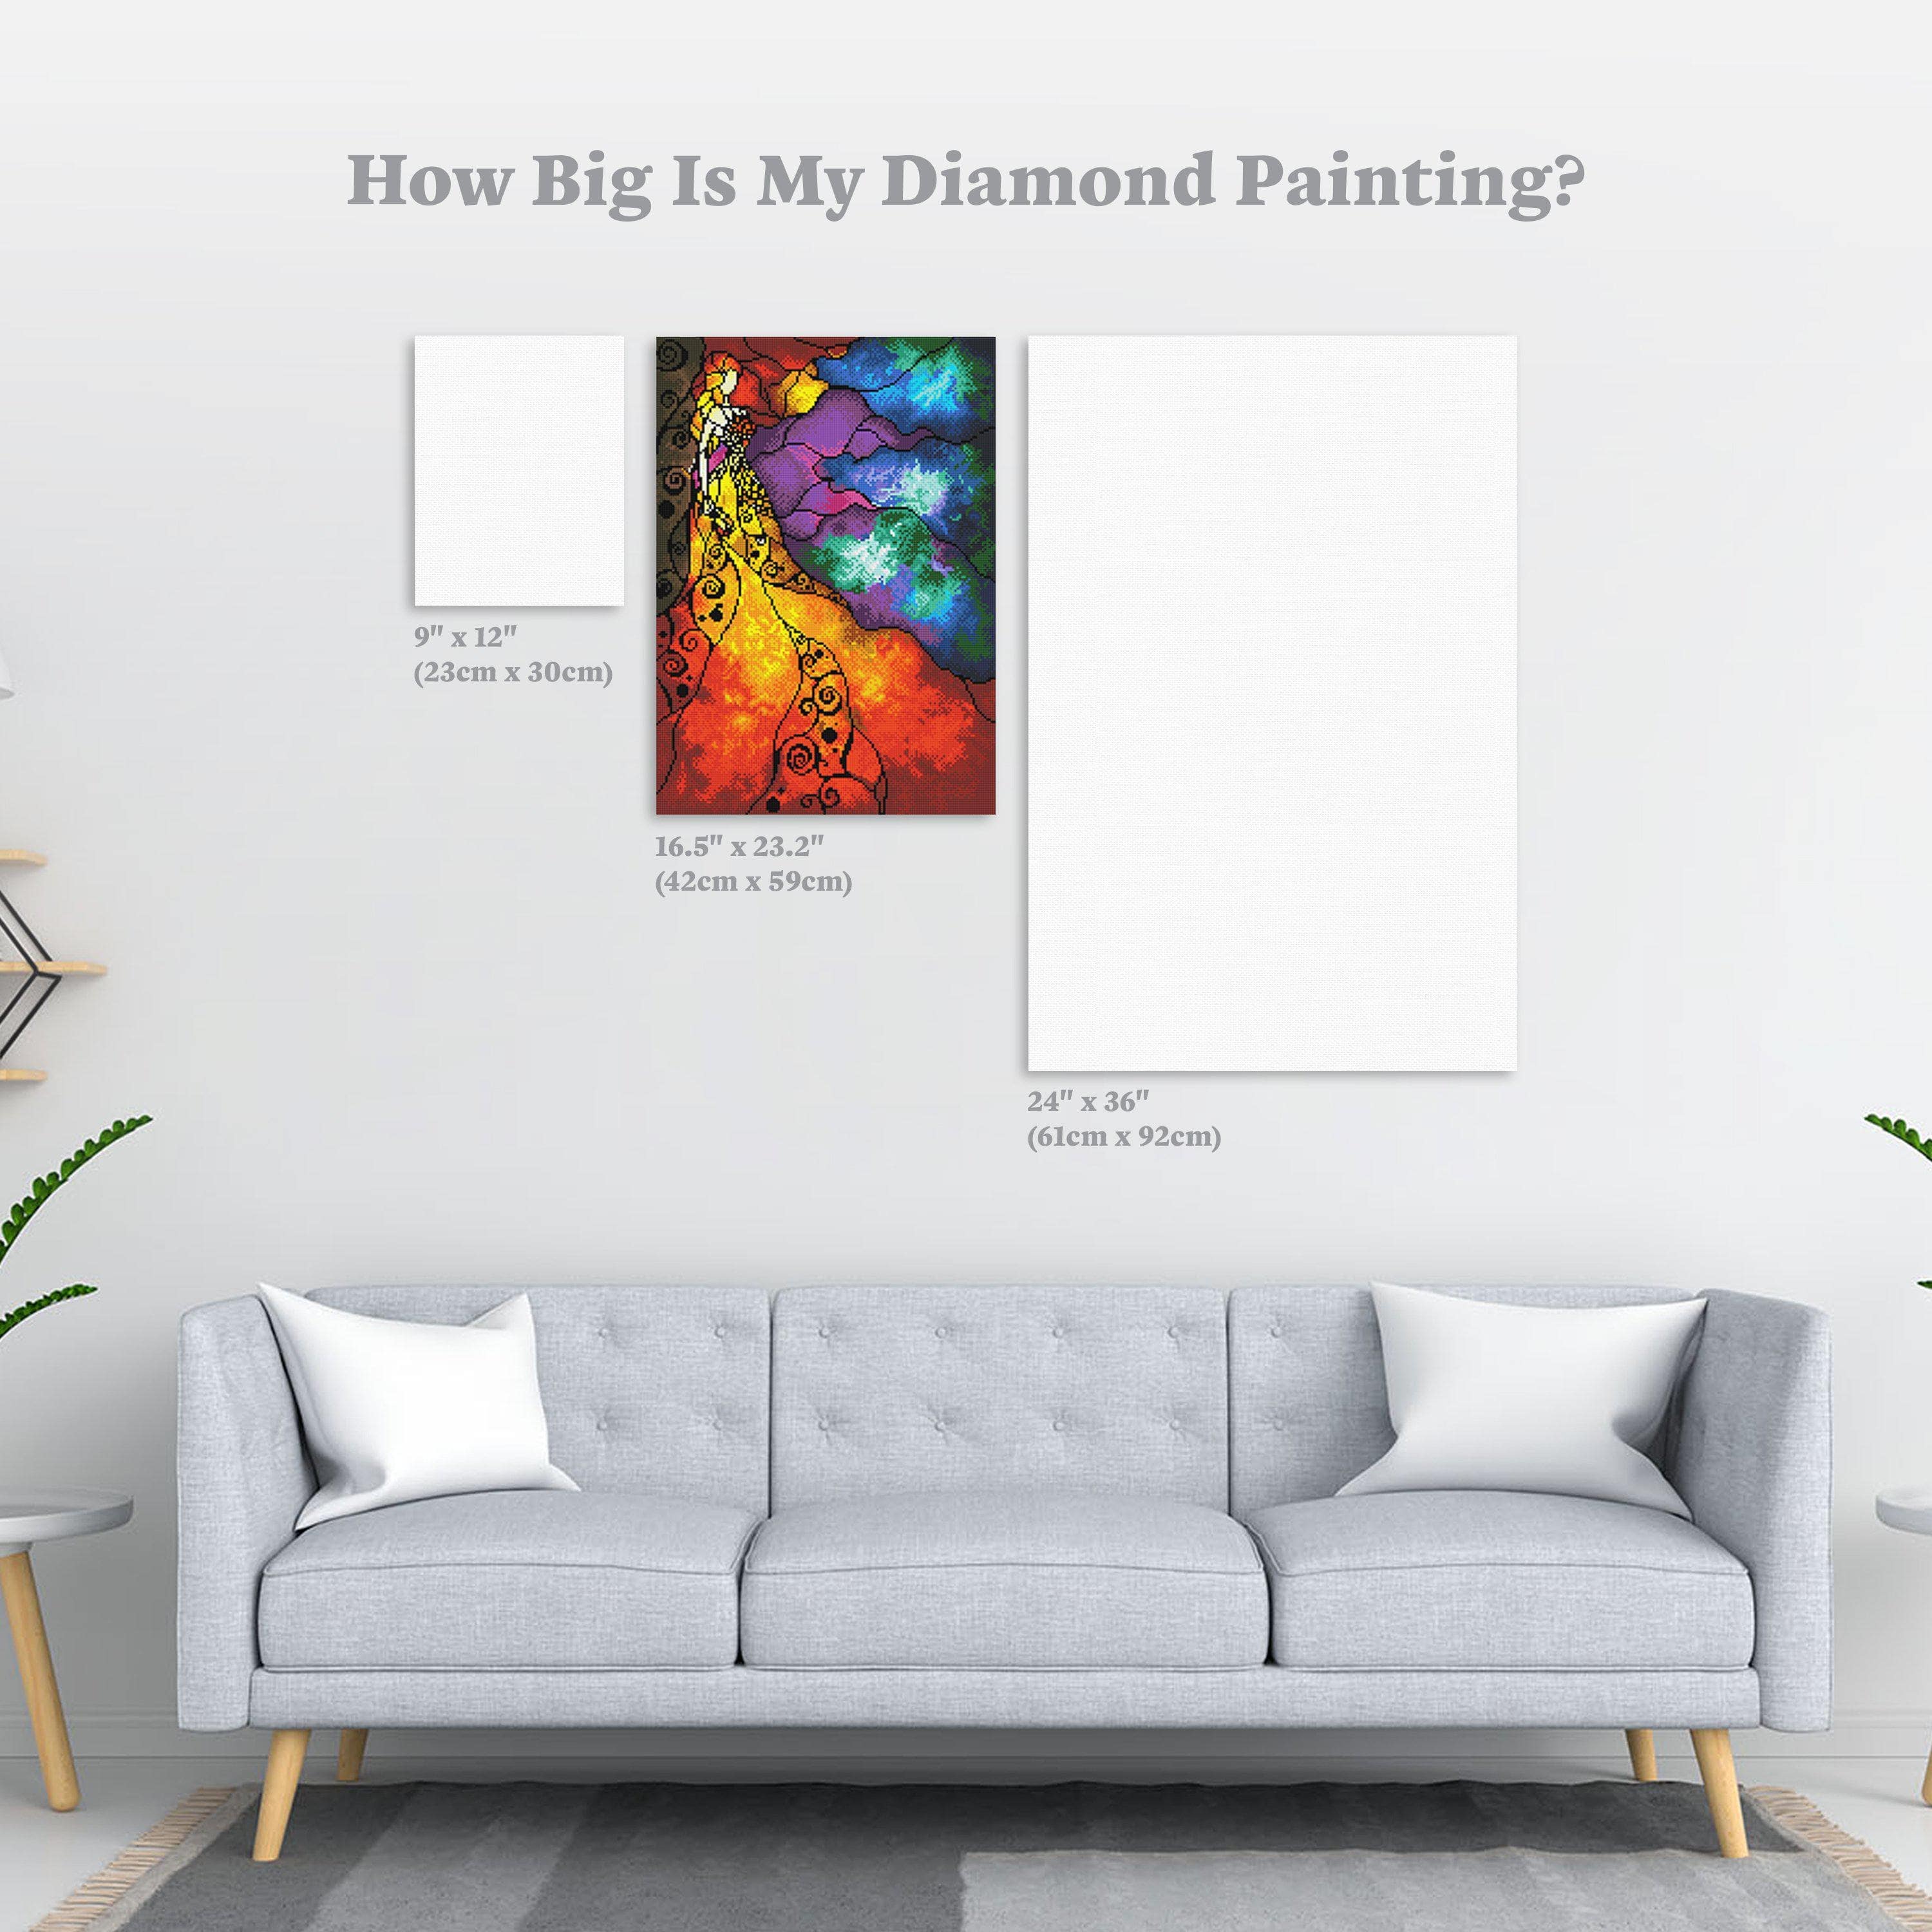  Beauty and the Beast Diamond Art Flower Diamond Painting DIY 5D  Princess Diamond Painting Kits for Adults and Kids Full Drill Arts Craft by  Number Kits for Beginner Home Decoration 12x16